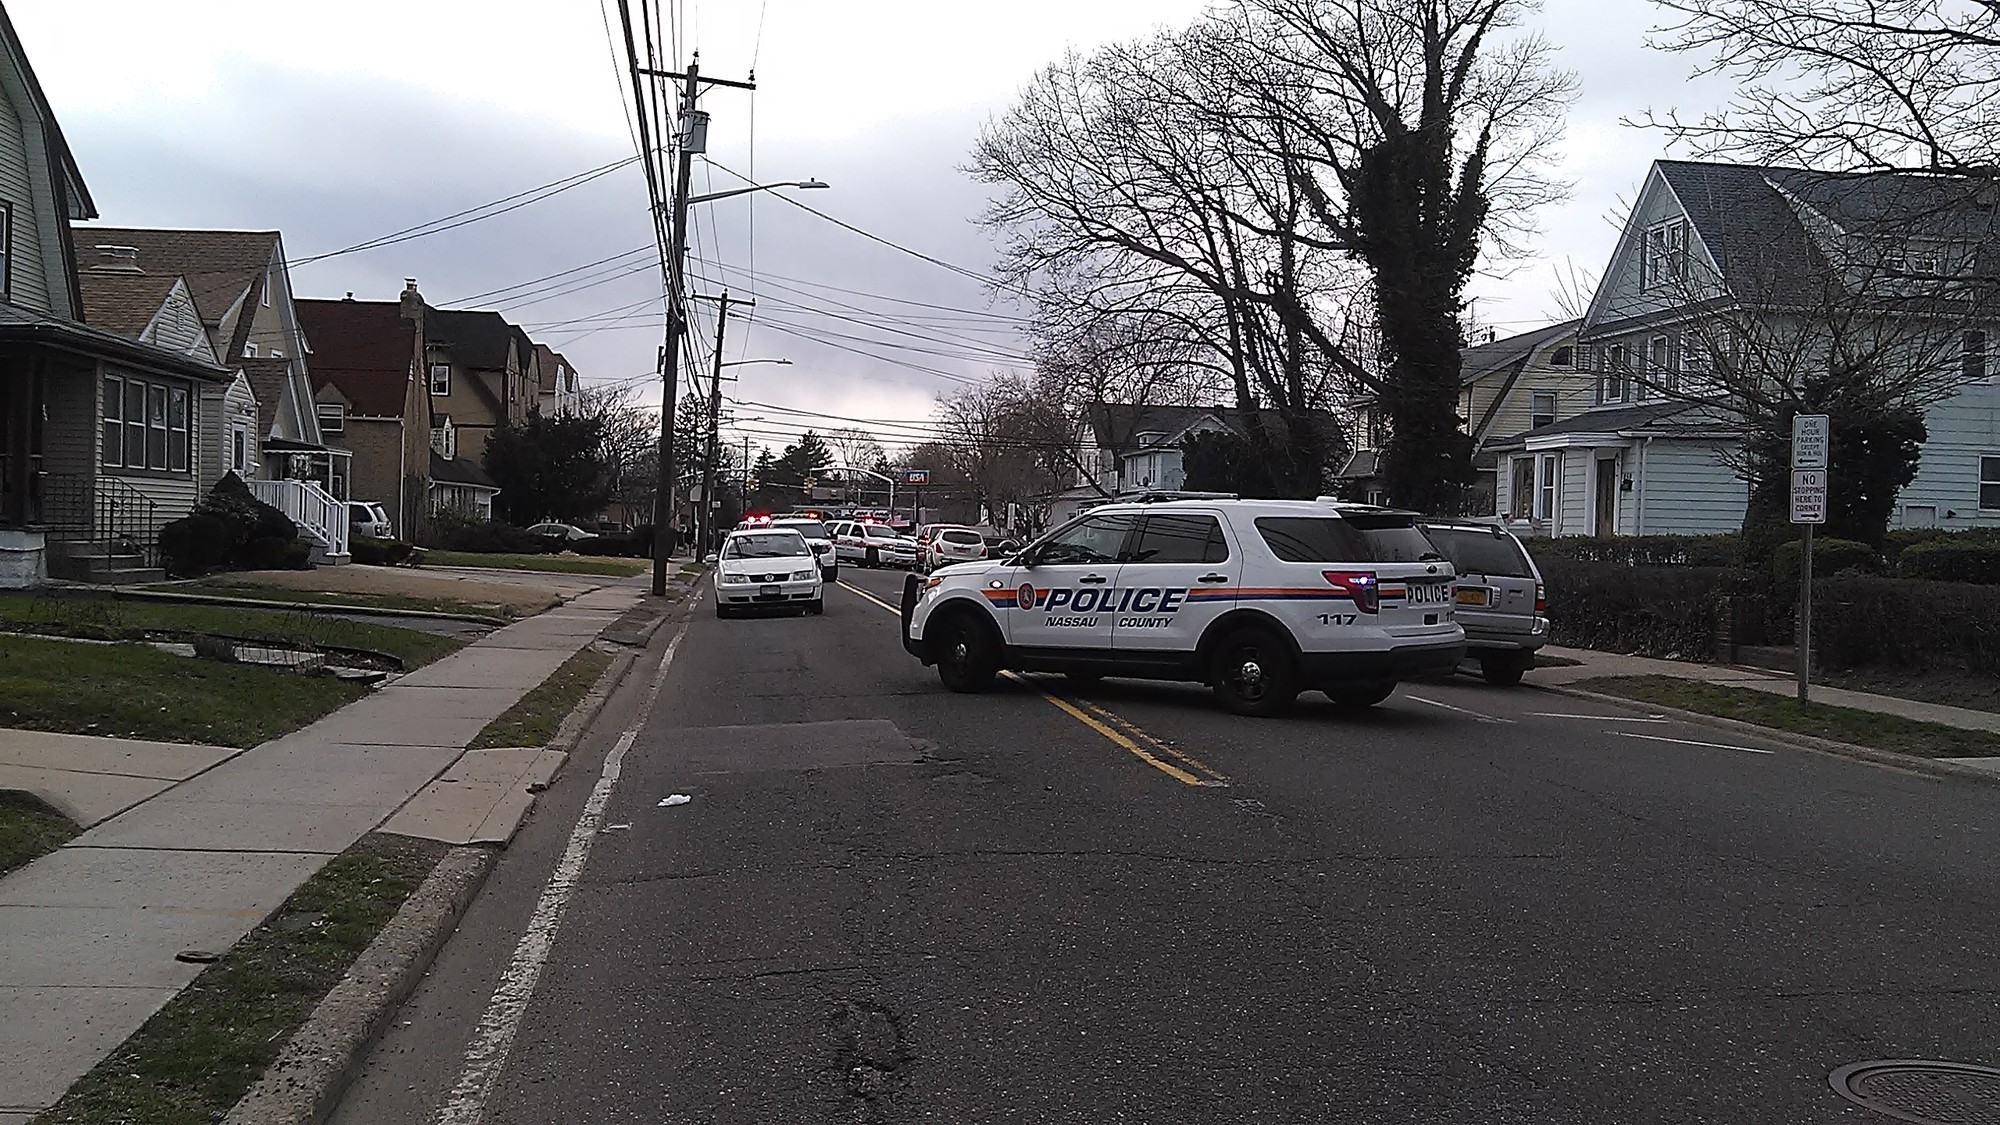 The police arrived at the scene shortly after a young boy was hit by a car at the intersection of Fargo Street and West Seaman Avenue in Baldwin on Friday afternoon.